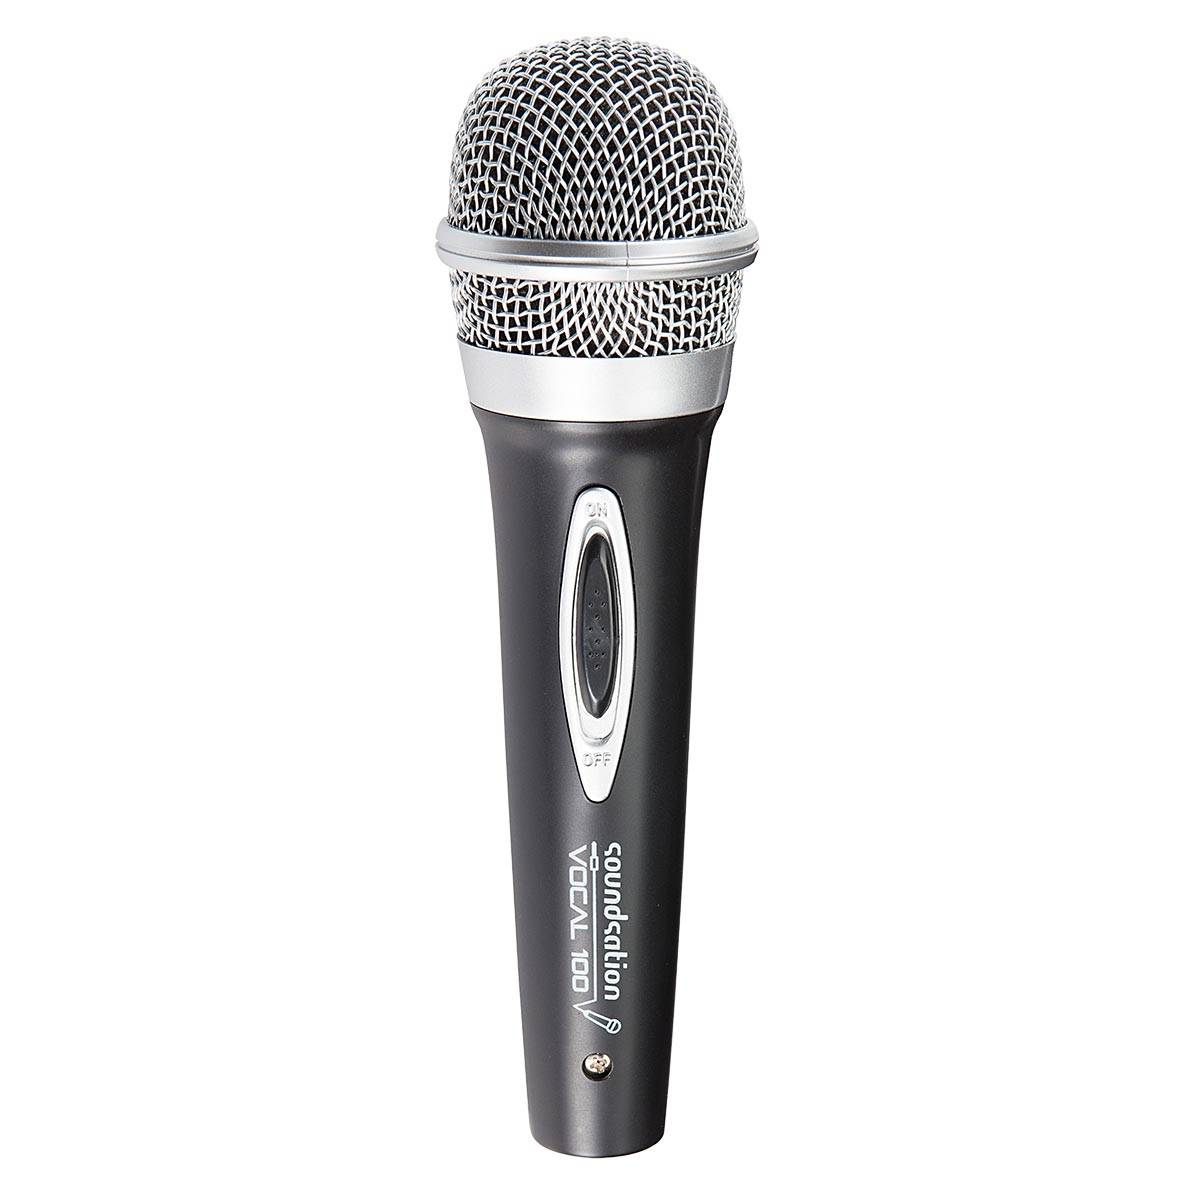 SOUNDSATION VOCAL 100 Cardioid Dynamic Microphone